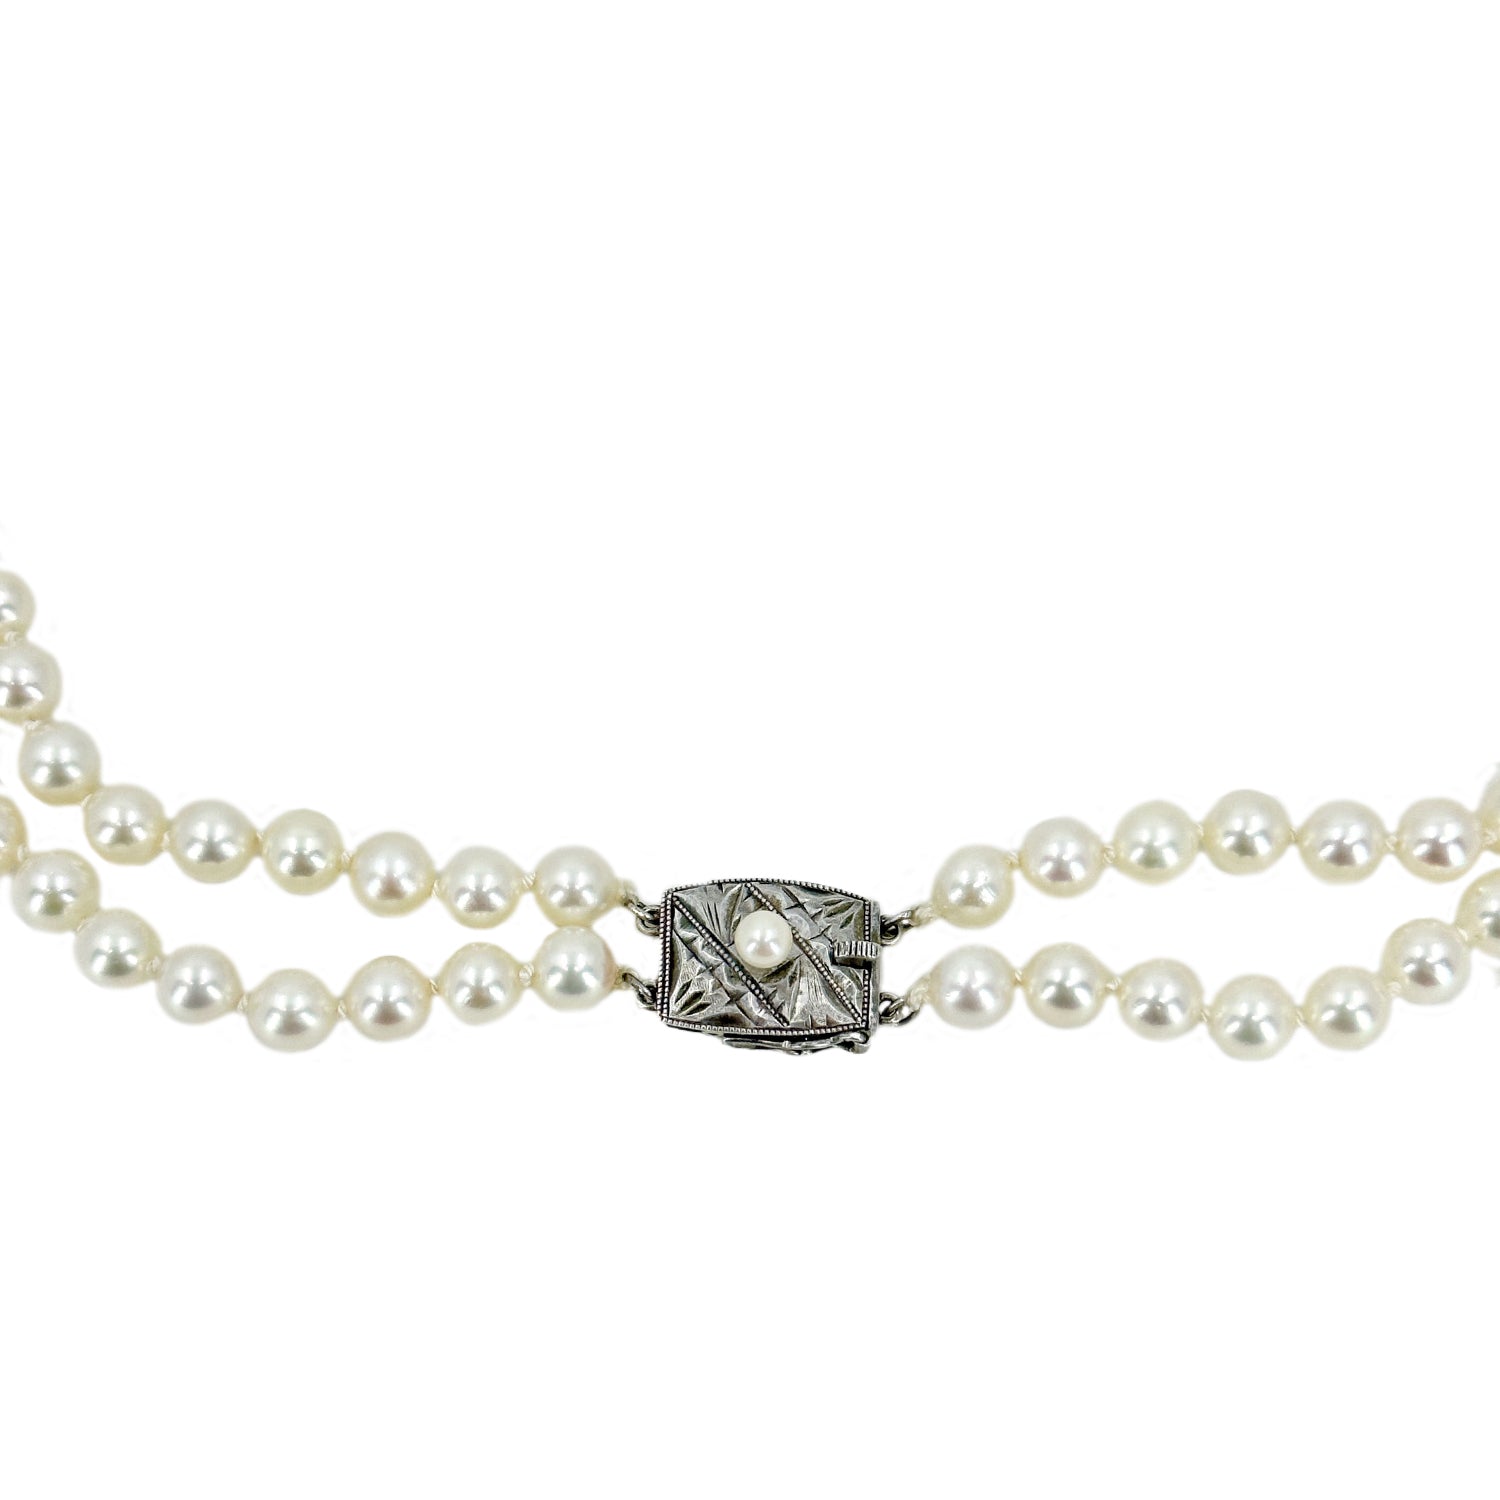 Art Deco Engraved Double Strand Japanese Cultured Akoya Pearl Choker Necklace -Sterling Silver 15.75 & 16.75 Inch